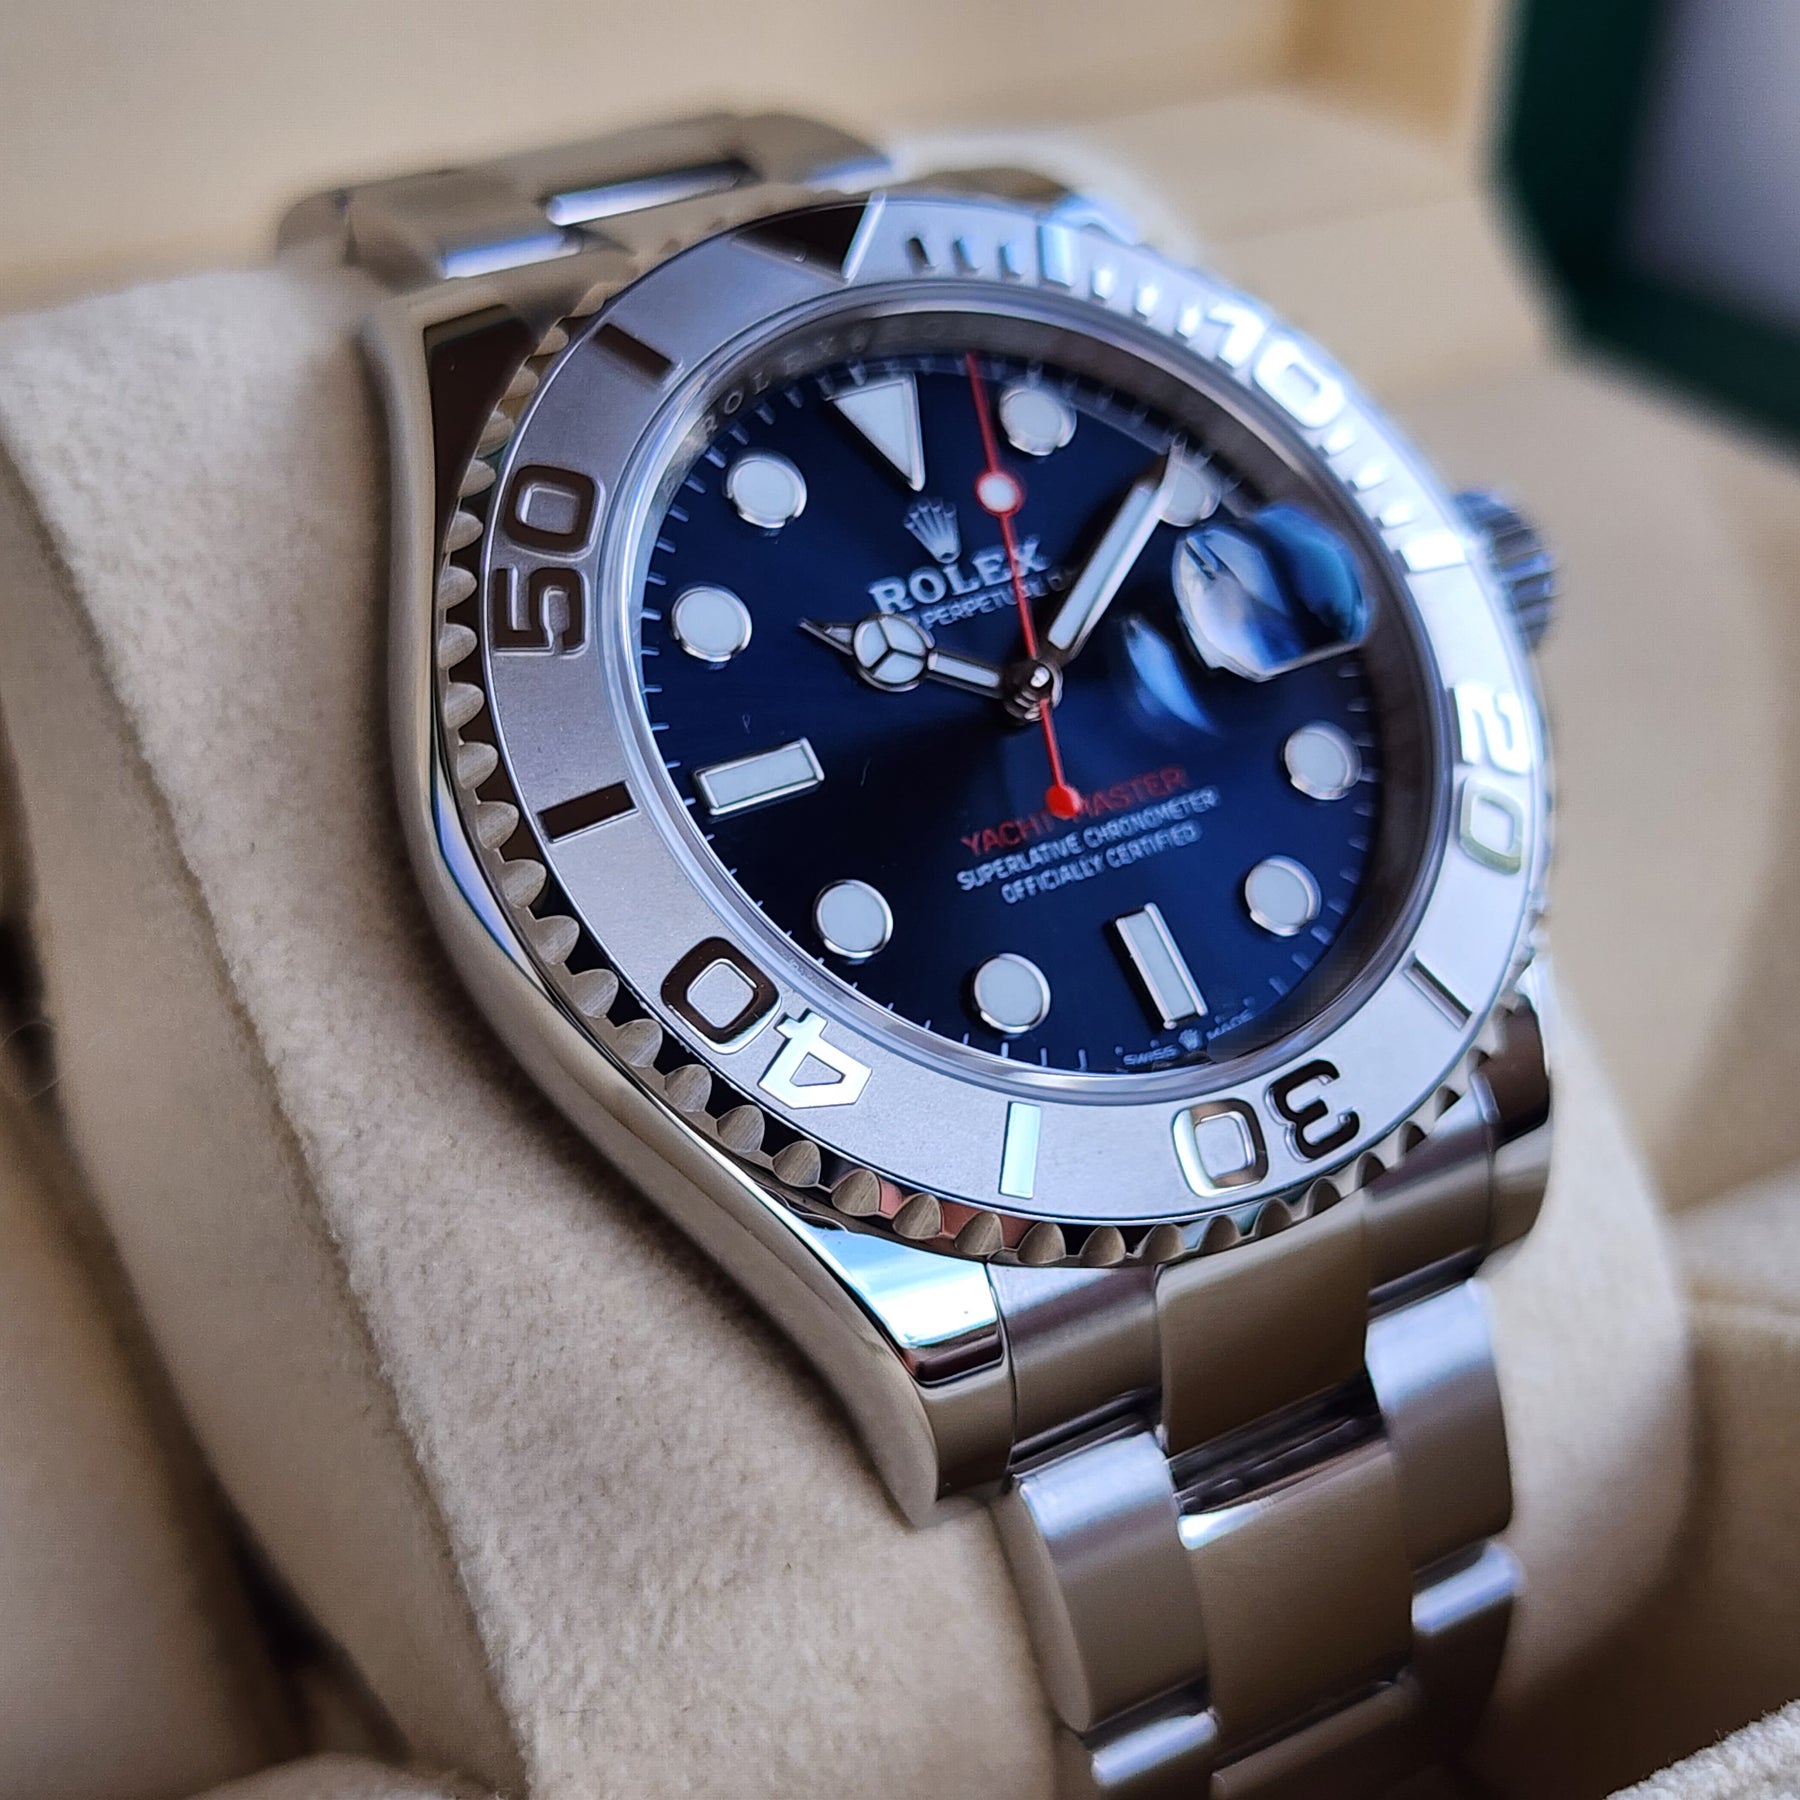 Rolex Yacht-Master Blue Dial 40mm